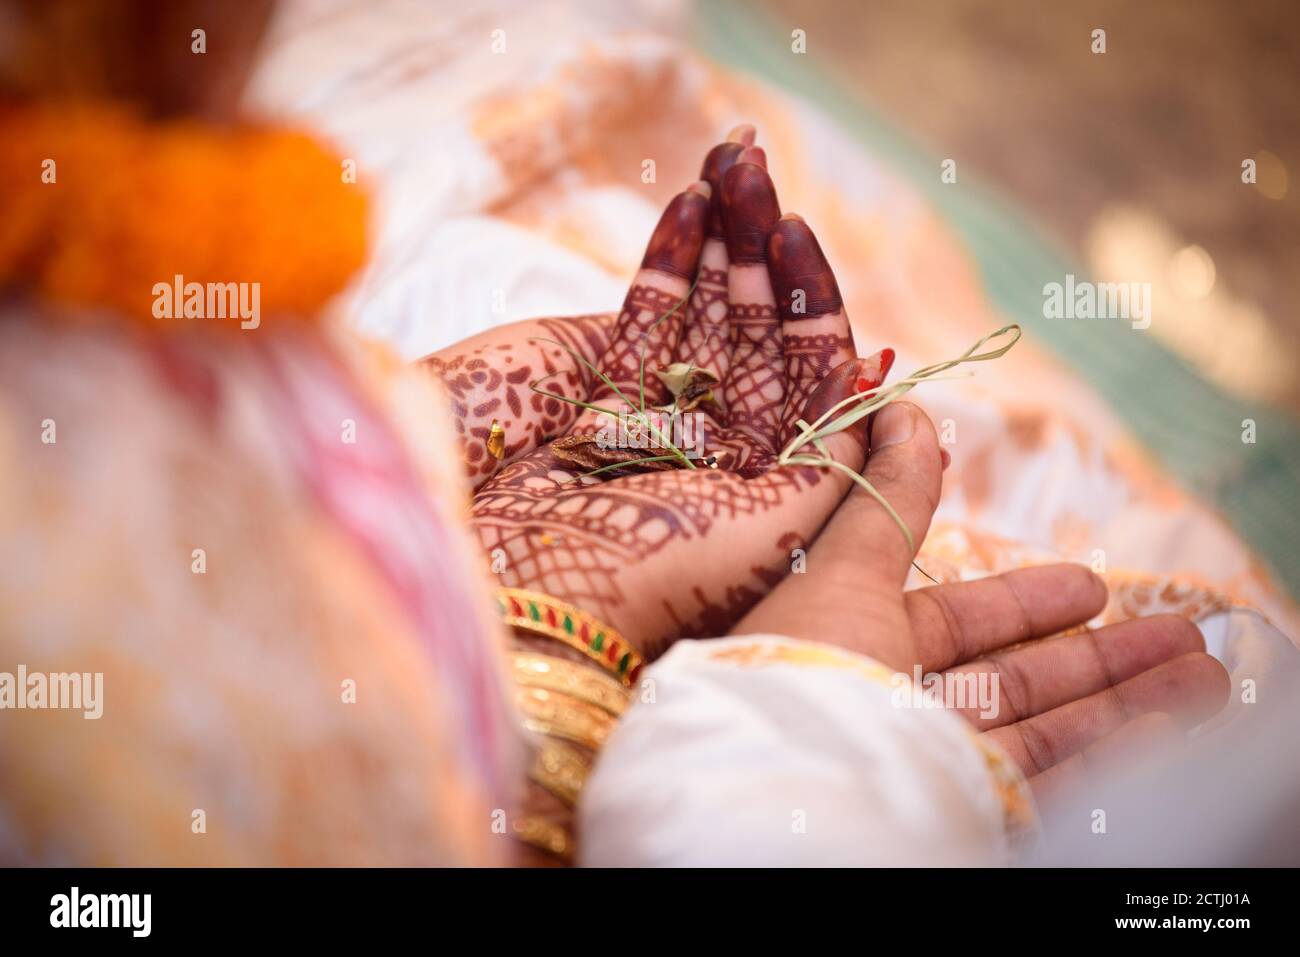 Indian Man With Ring On Finger Holding Free Stock Photo and Image 483546566